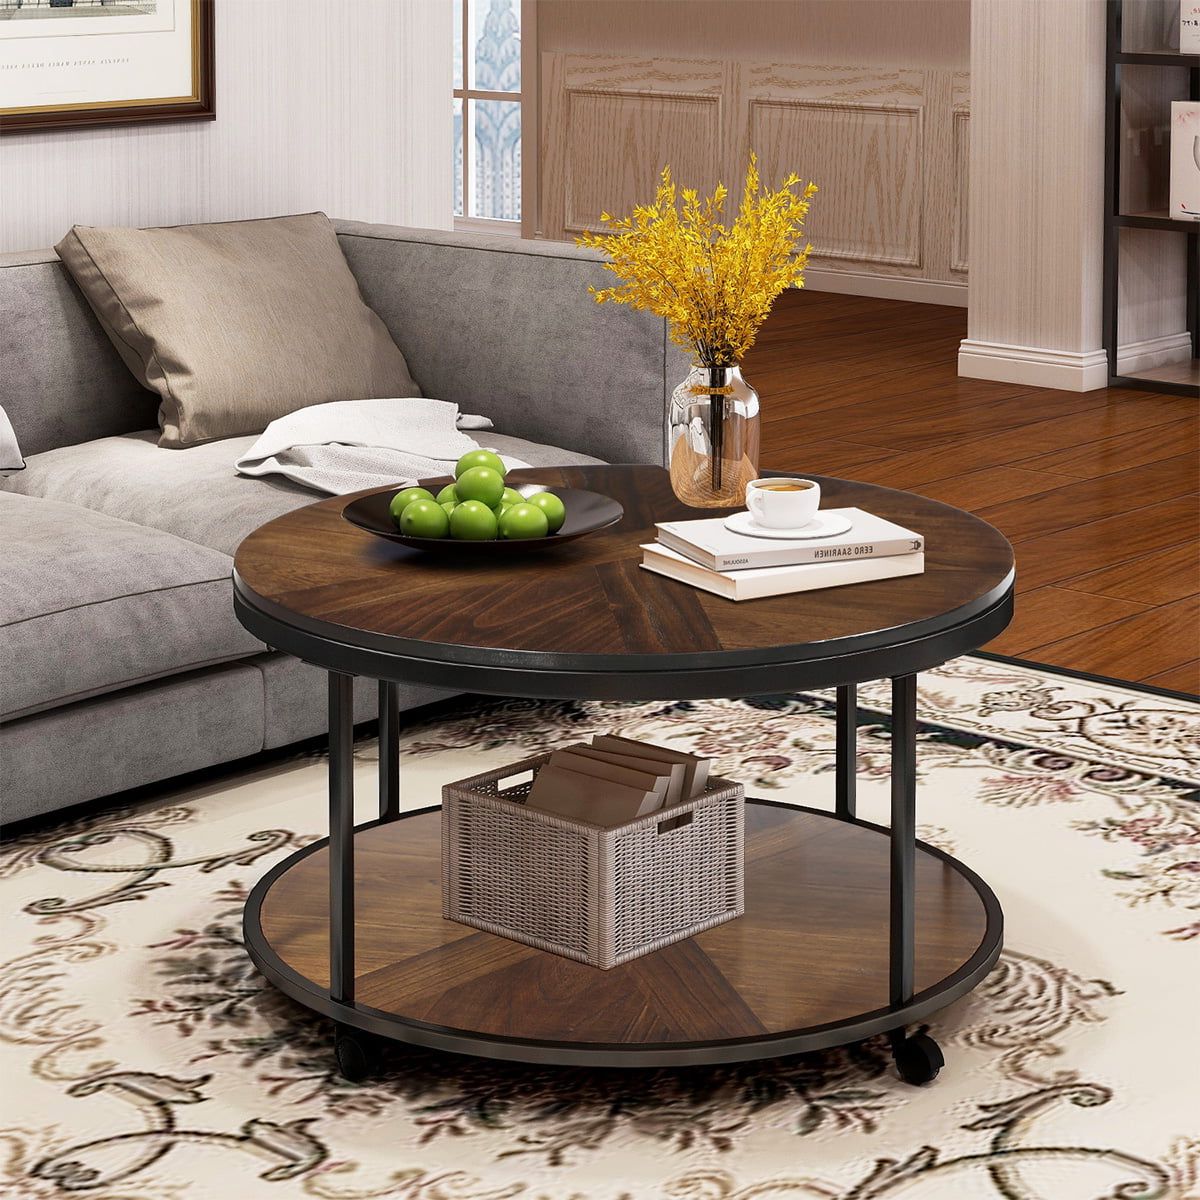 Sentern Round Coffee Table With Caster Wheels And Unique Textured Pertaining To Best And Newest Round Coffee Tables (Photo 4 of 15)